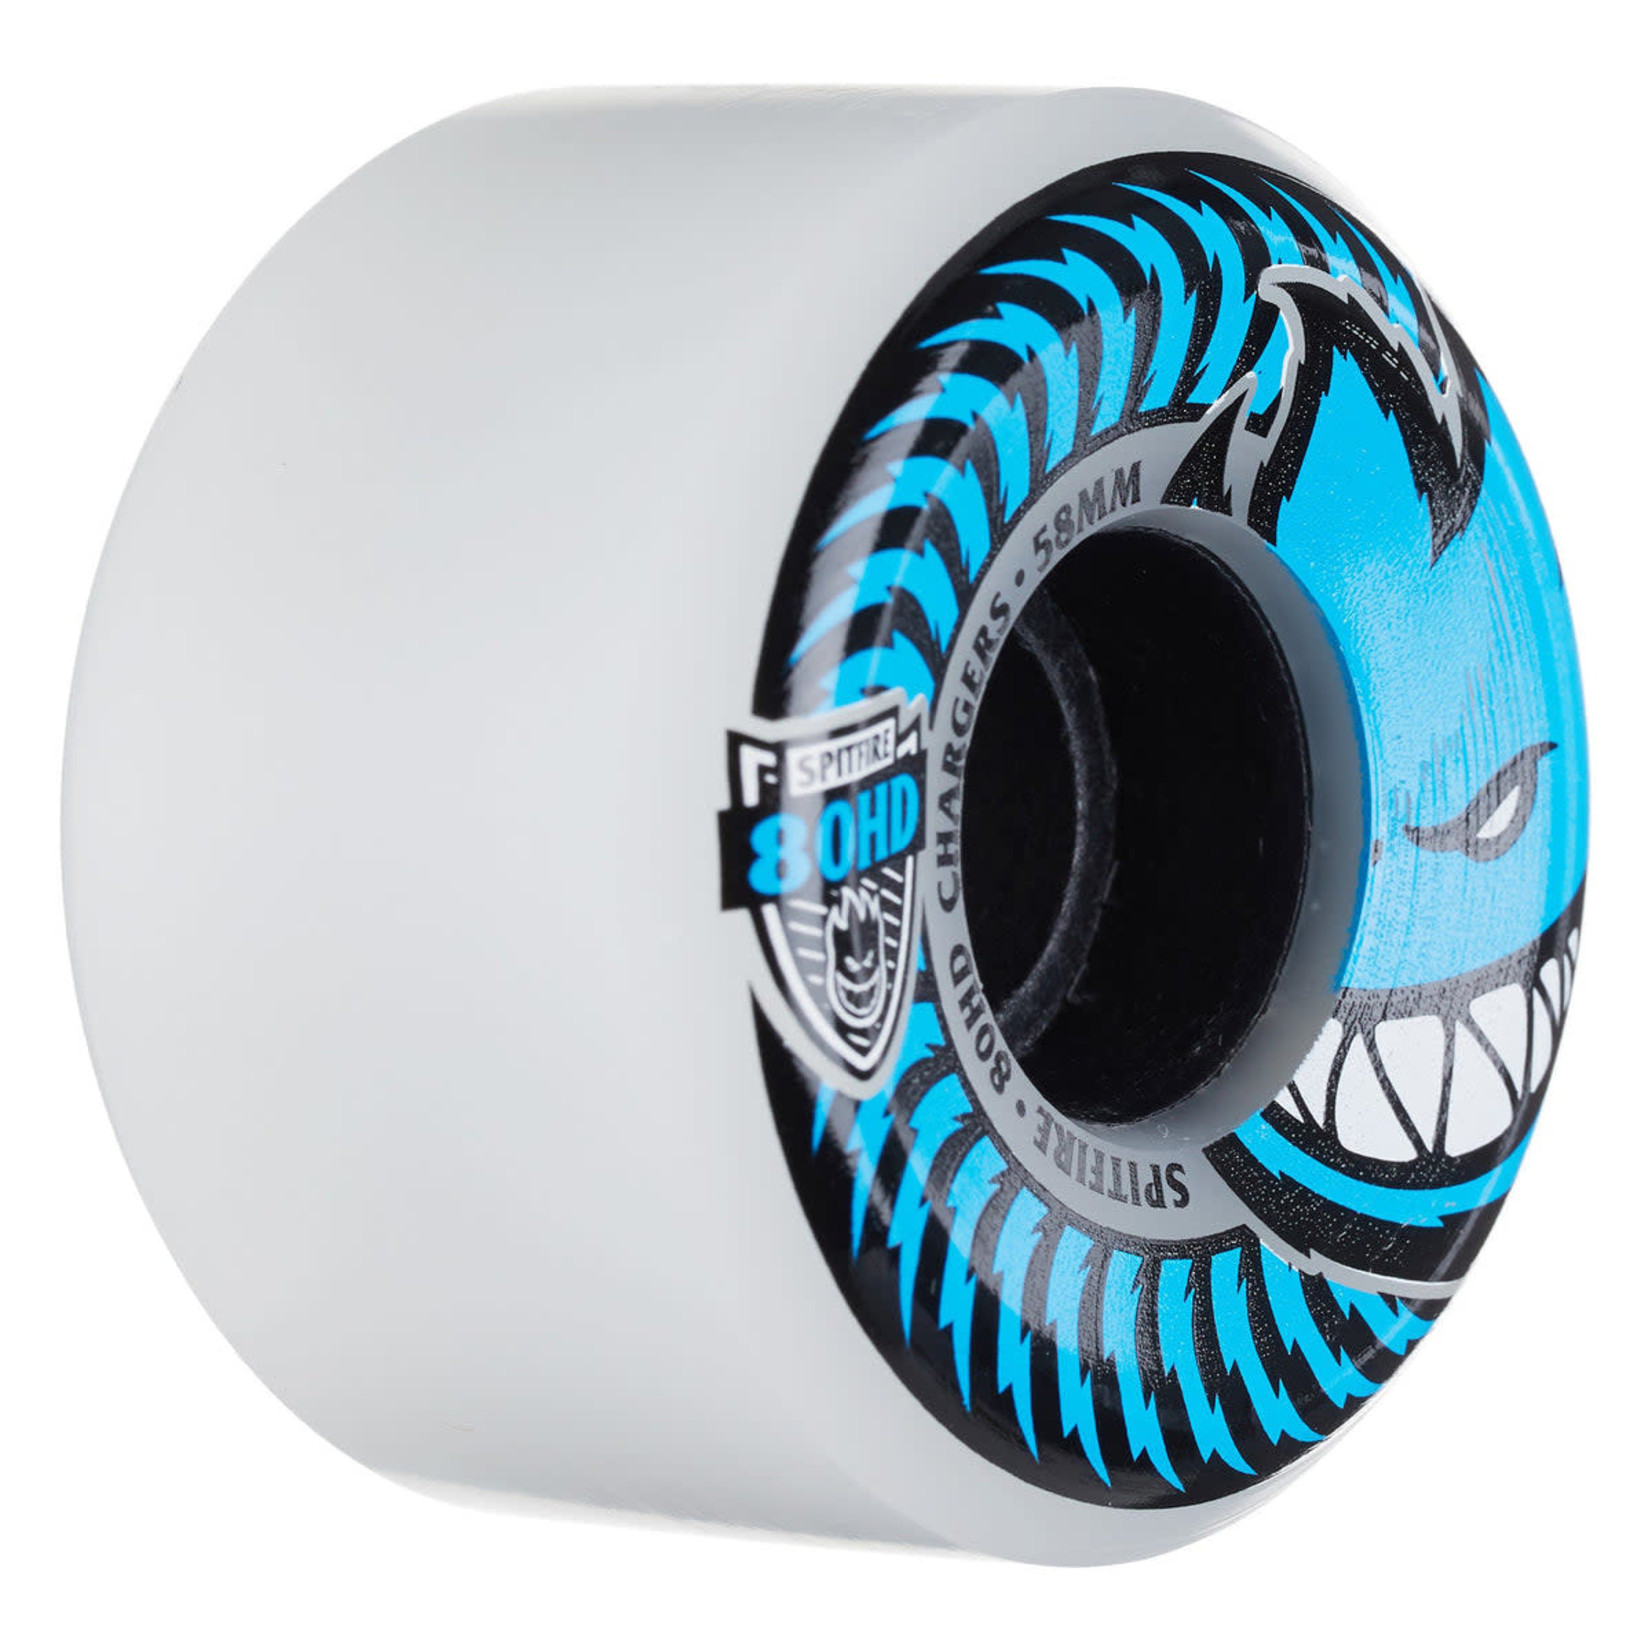 Spitfire Spitfire 80HD Conical Full Wheels 58mm